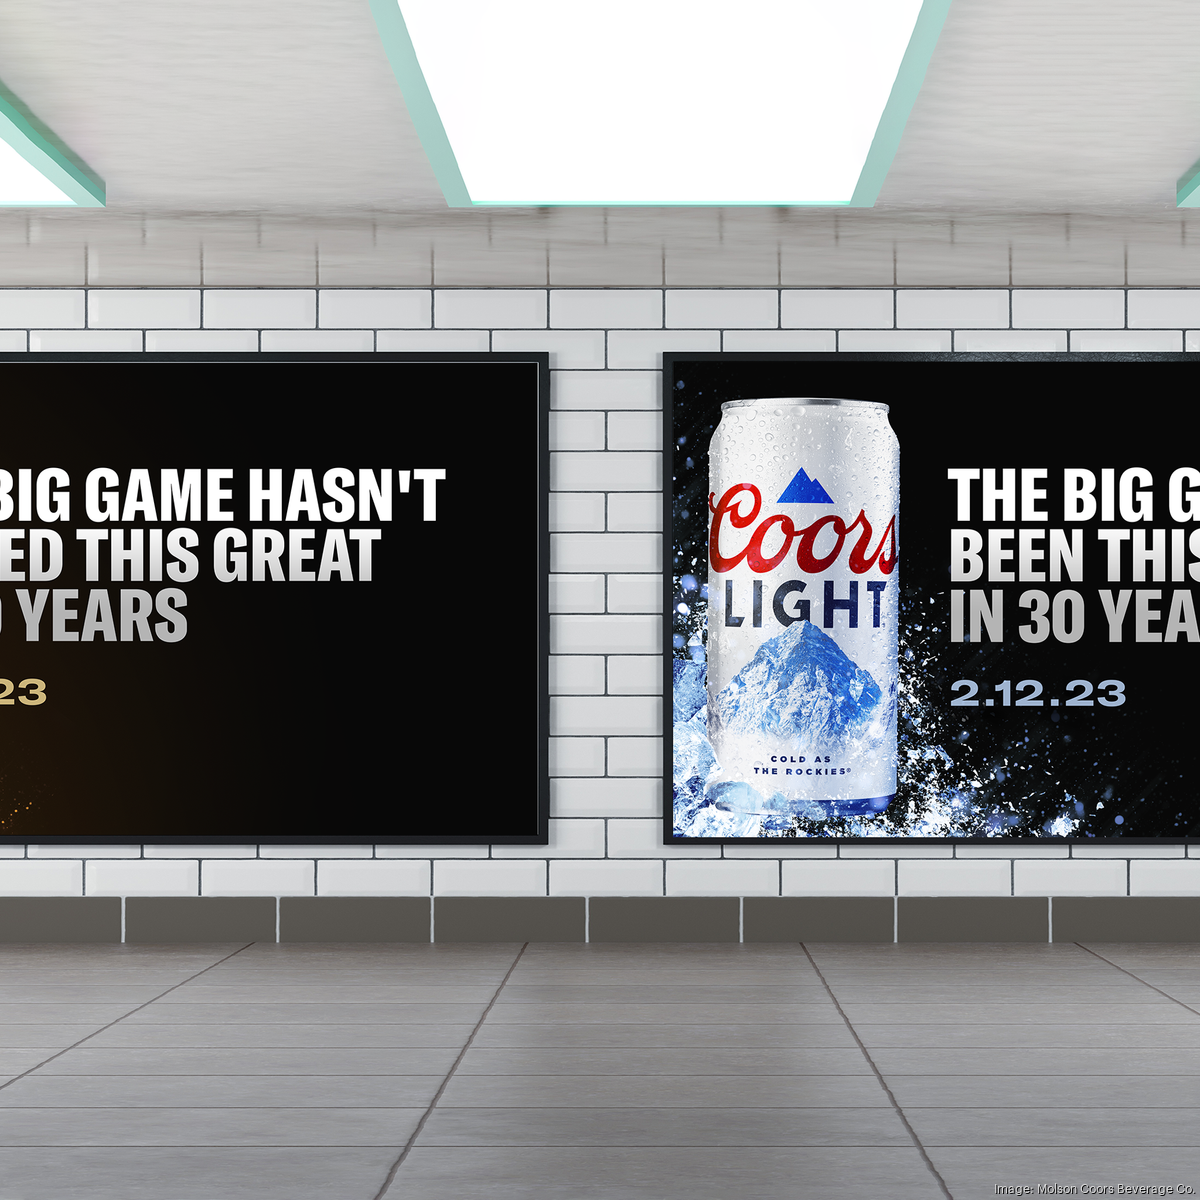 Coors Light has a 'Beer Bale' cooler. Here's how to buy, and maybe win,  one. 